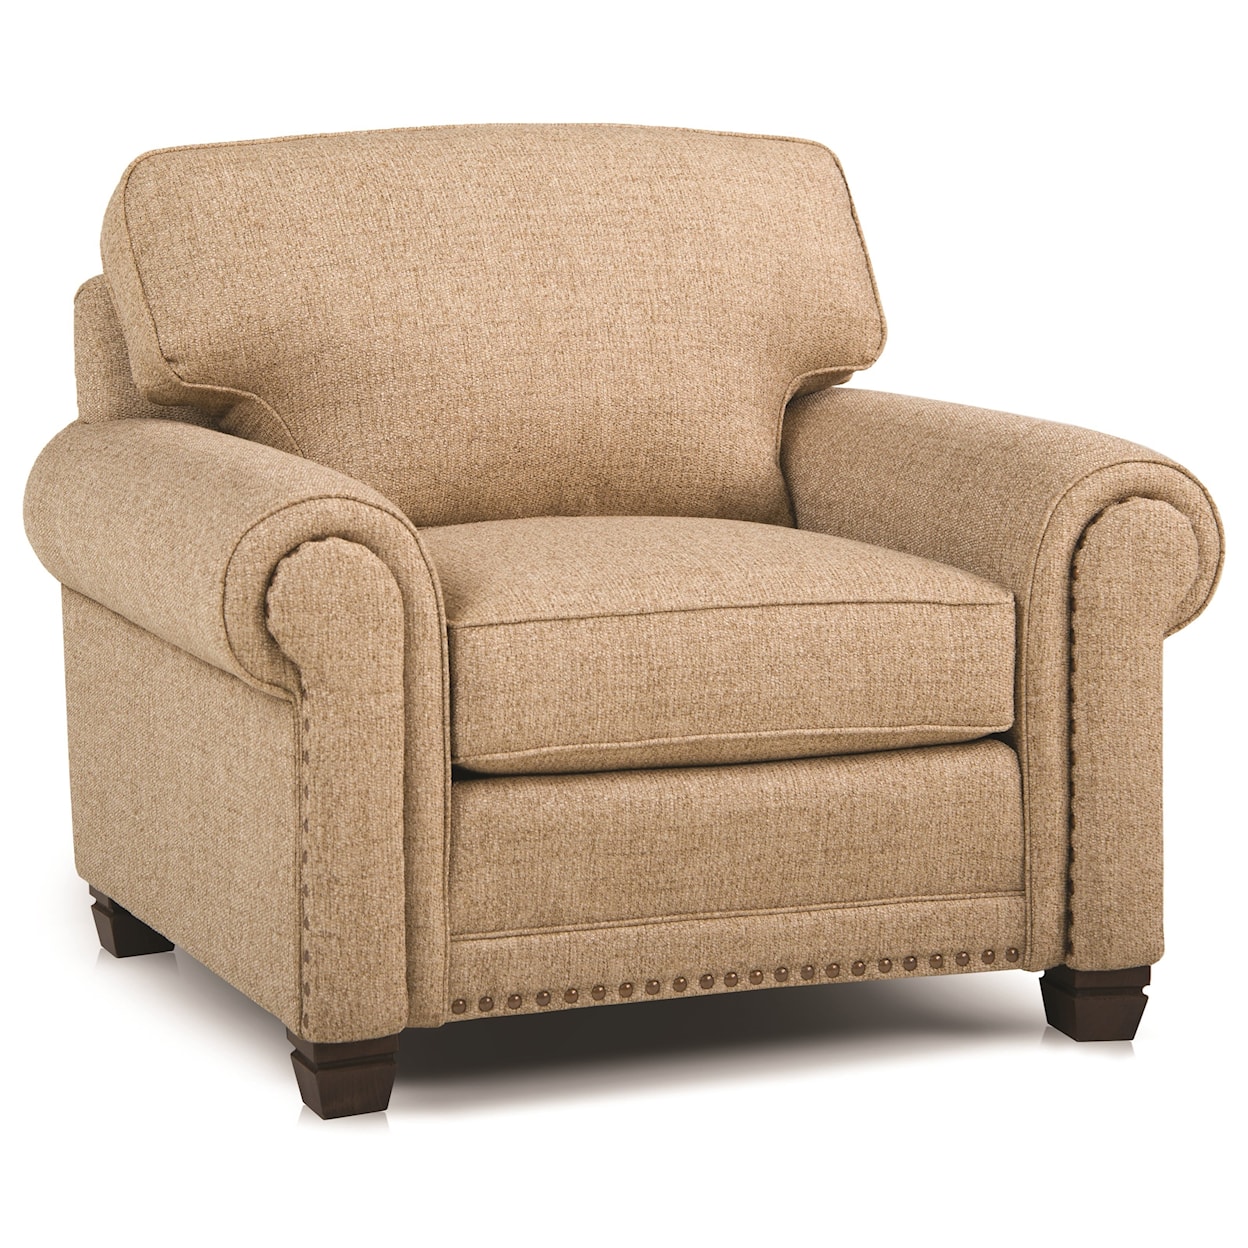 Smith Brothers 393 Traditional Stationary Chair